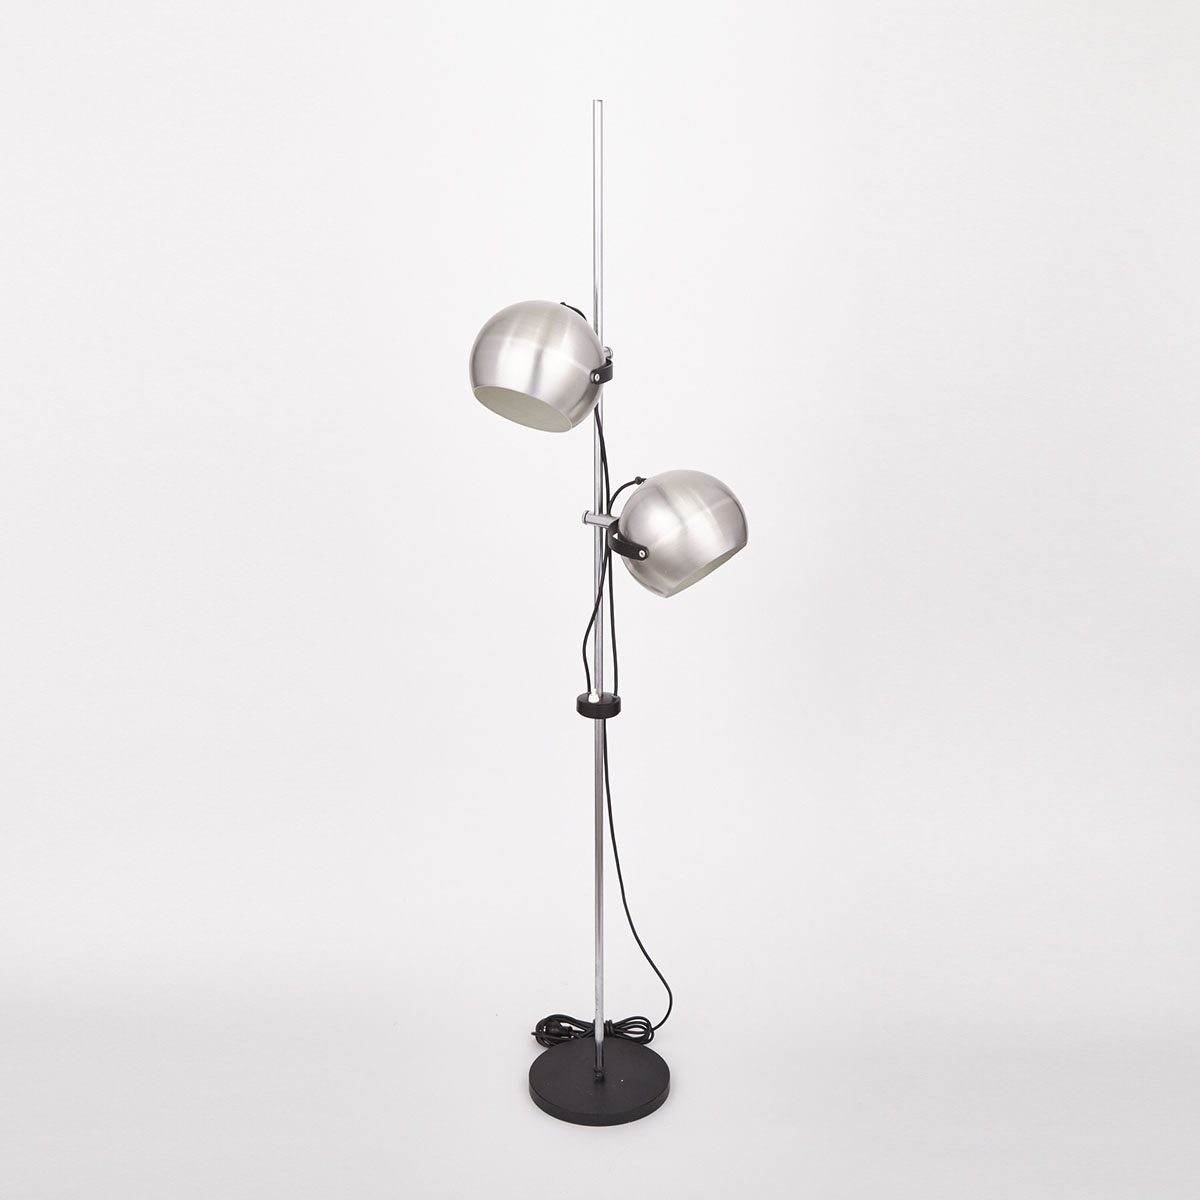 Black Lacquered and Chromed Metal Two Light Floor Lamp, mid 20th century